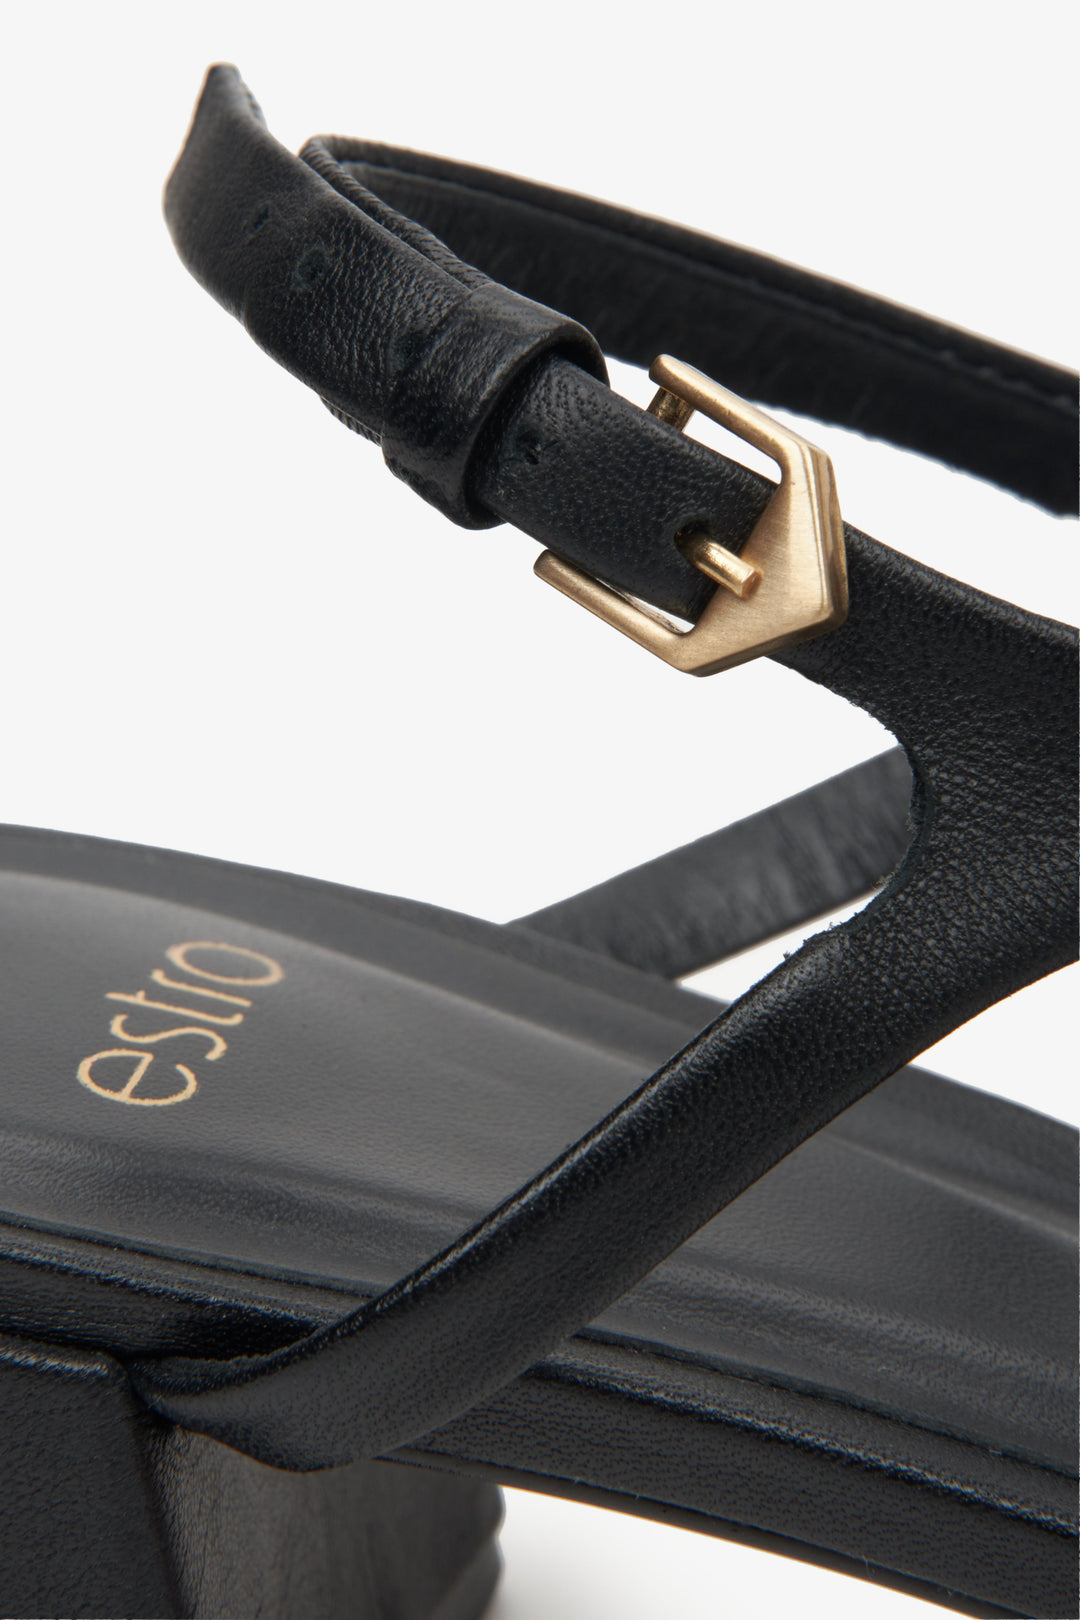 Women's black sandals made of genuine leather by Estro - close-up on details.